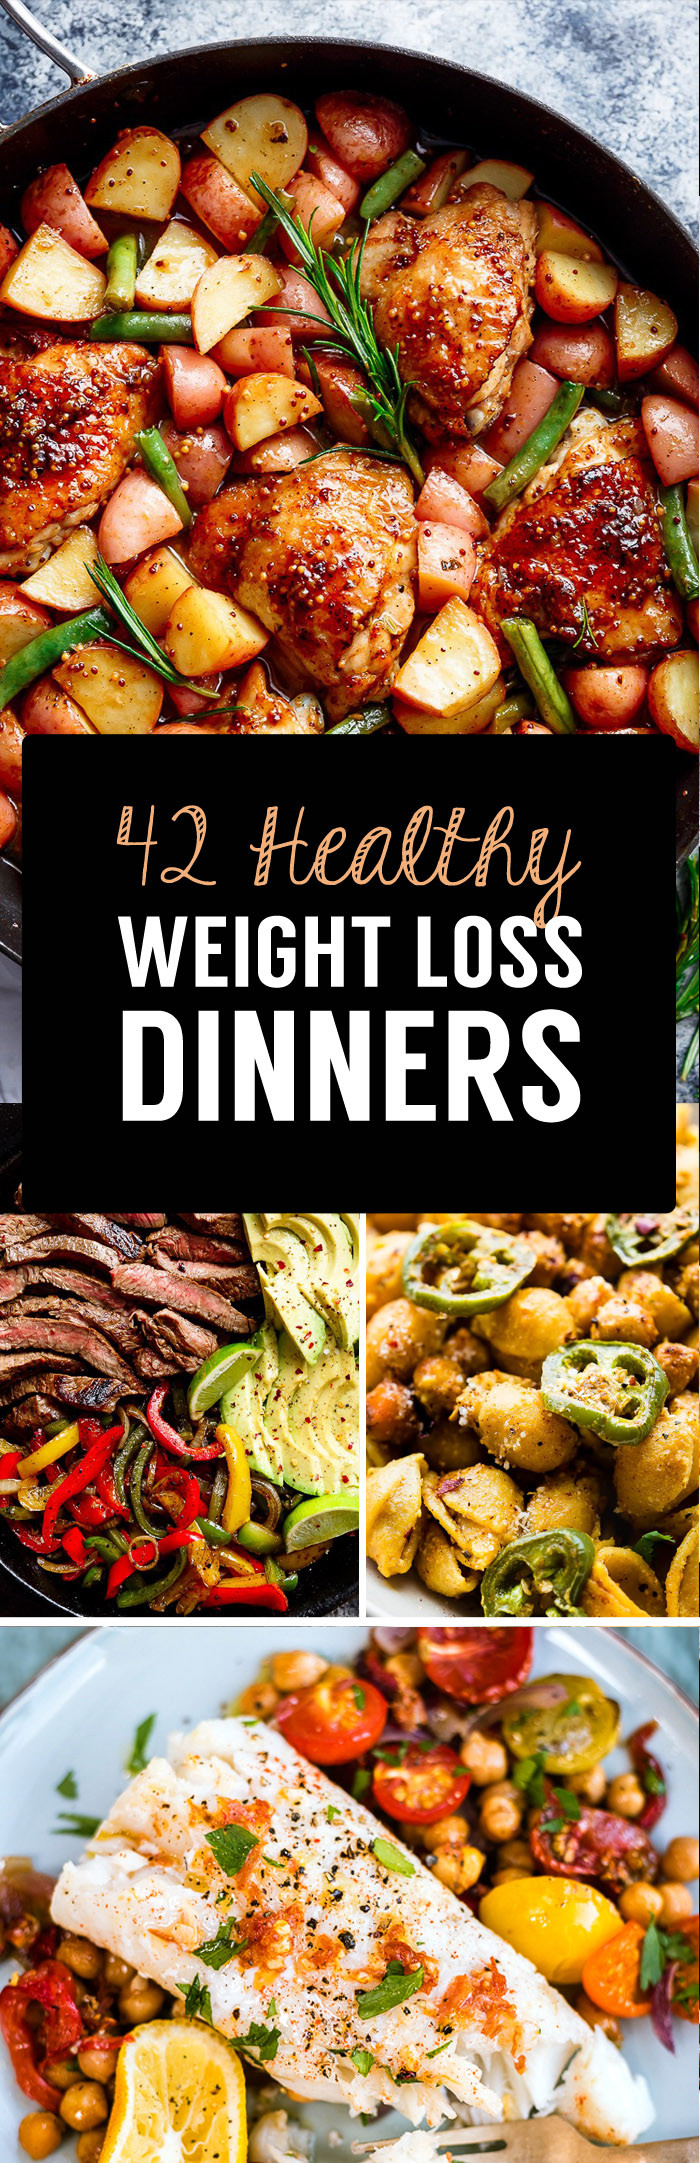 Weight Loss Winter Recipes
 42 Weight Loss Dinner Recipes That Will Help You Shrink